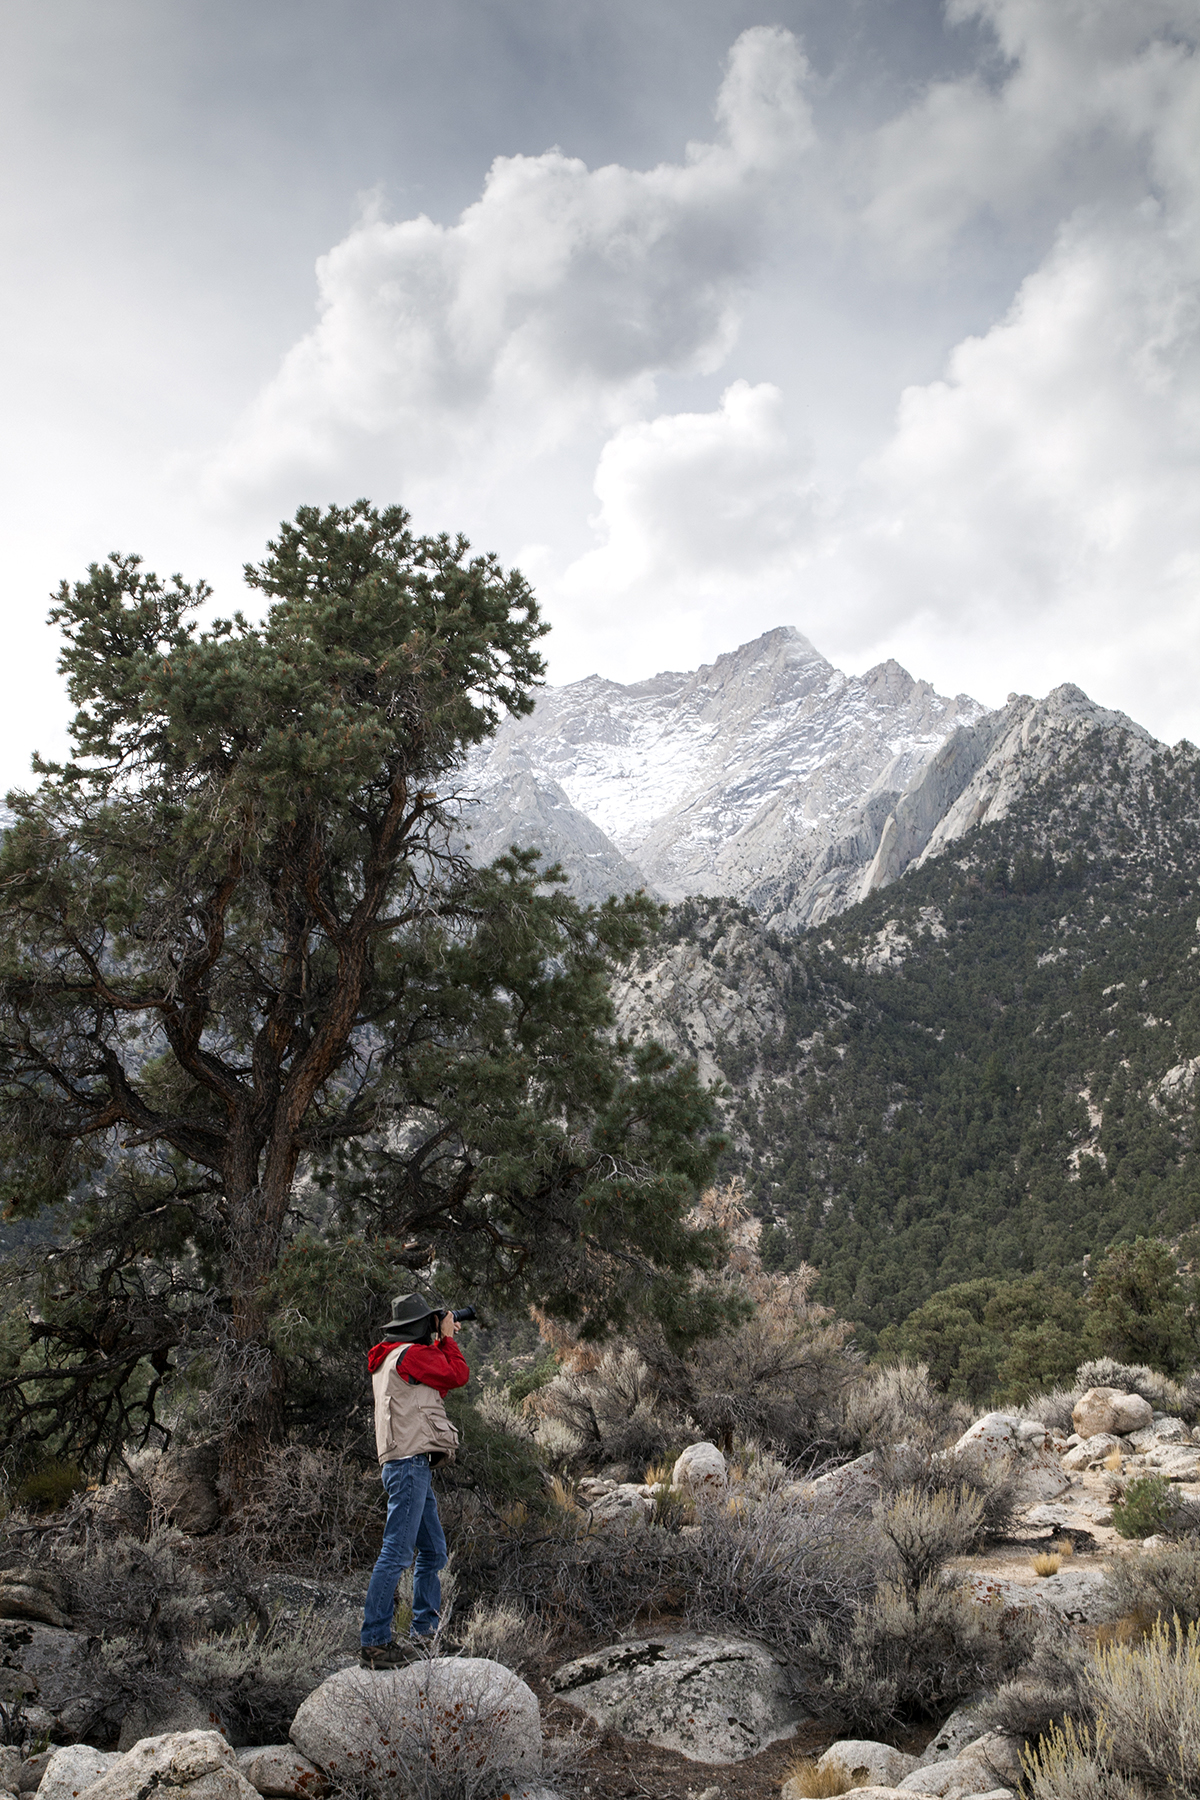 Palomar student Niko Holt photographing on Whitney Portal Road. Photo by Dan Nougier